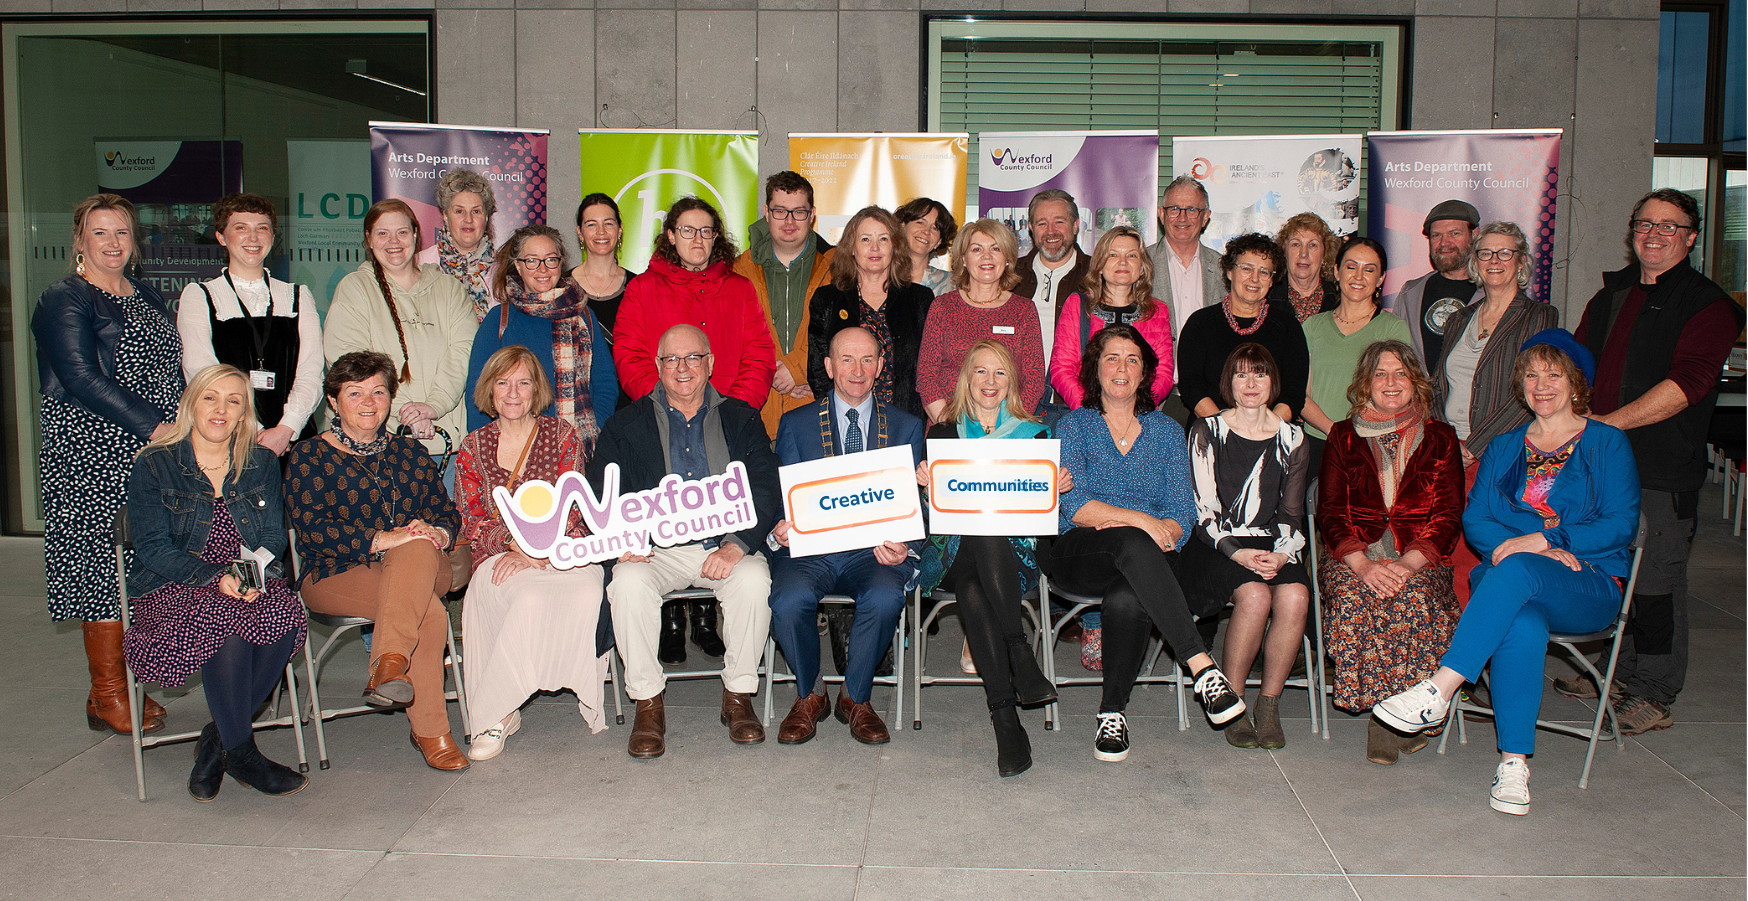 Some of the successful Community Groups and artists pictured with Cathaoirleach John Fleming, County Librarian Eileen Morrissey, Arts Officer Liz Burns and Assistant Arts Officer Úna Cahill